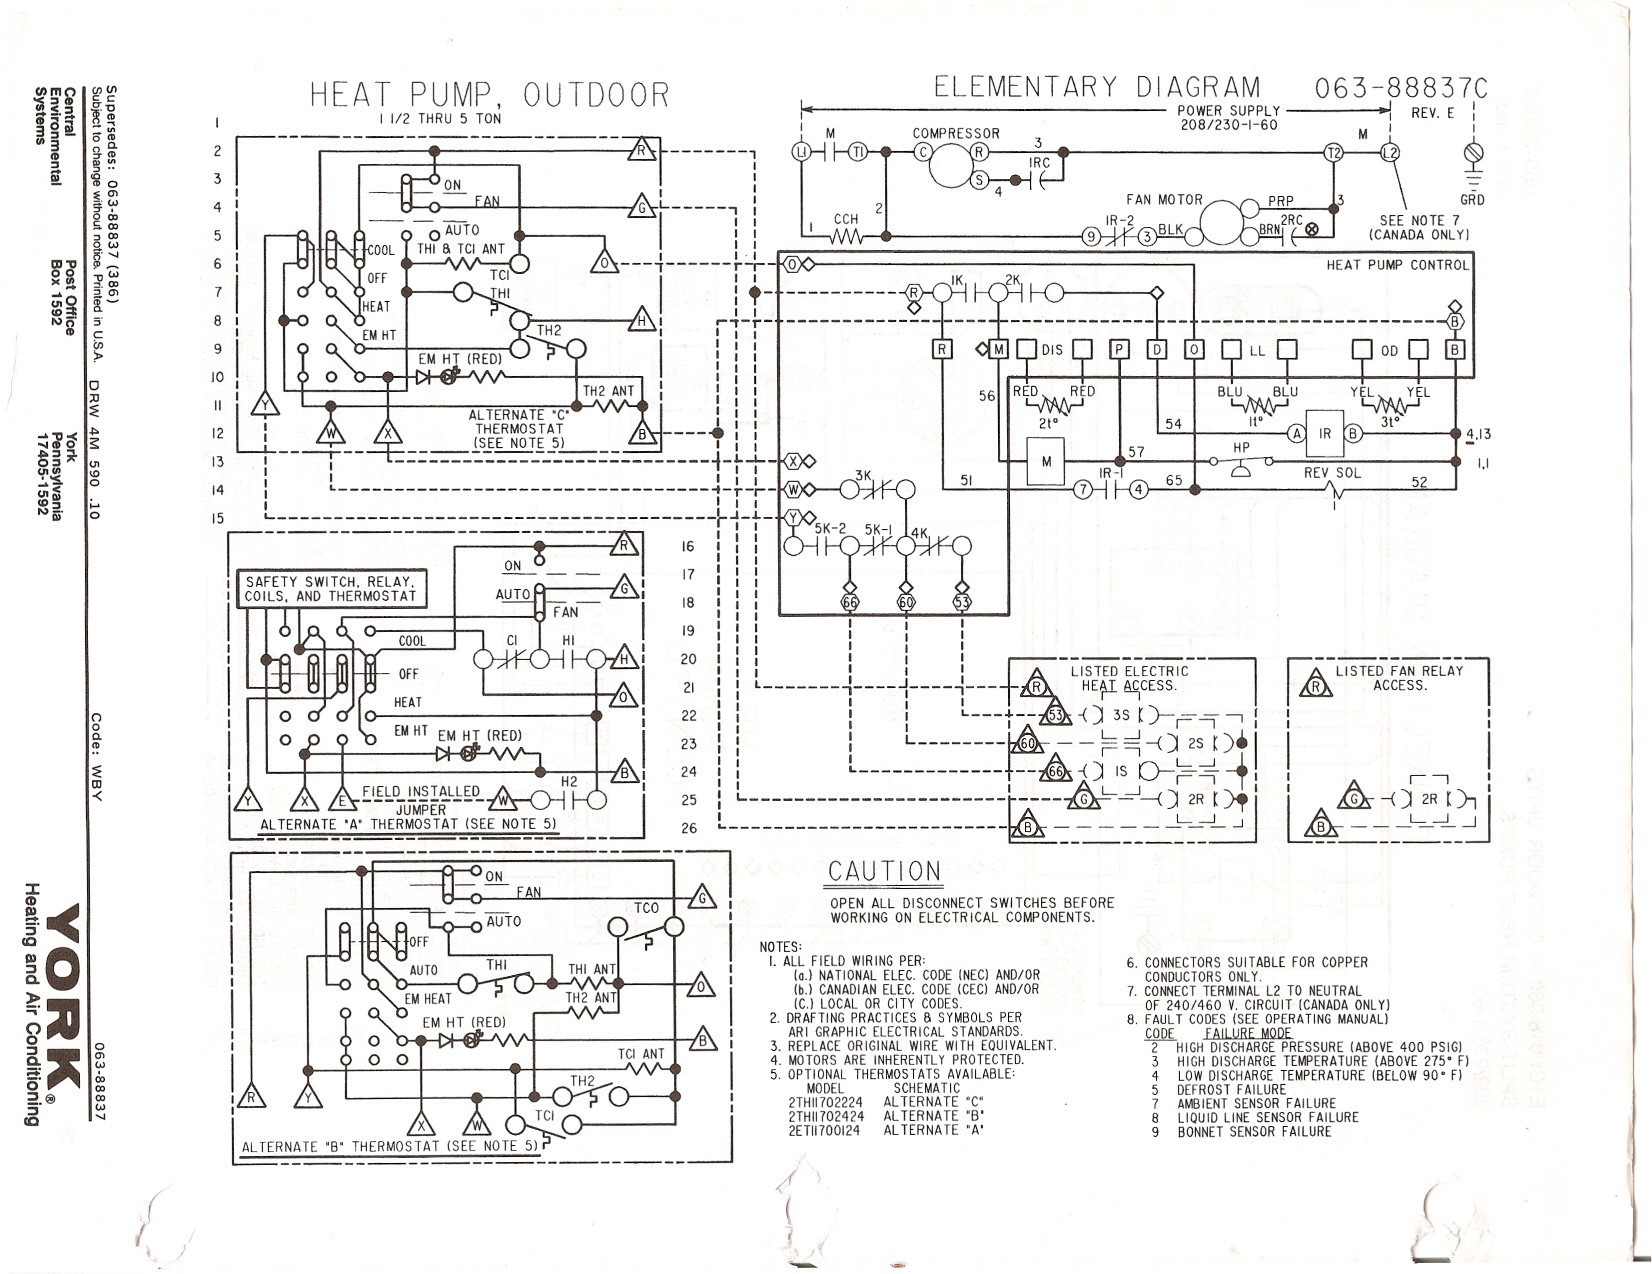 Carrier thermostat Wiring Diagram Inspirational Electric Heat Strip Wiring Diagram Diagram Of Carrier thermostat Wiring Diagram